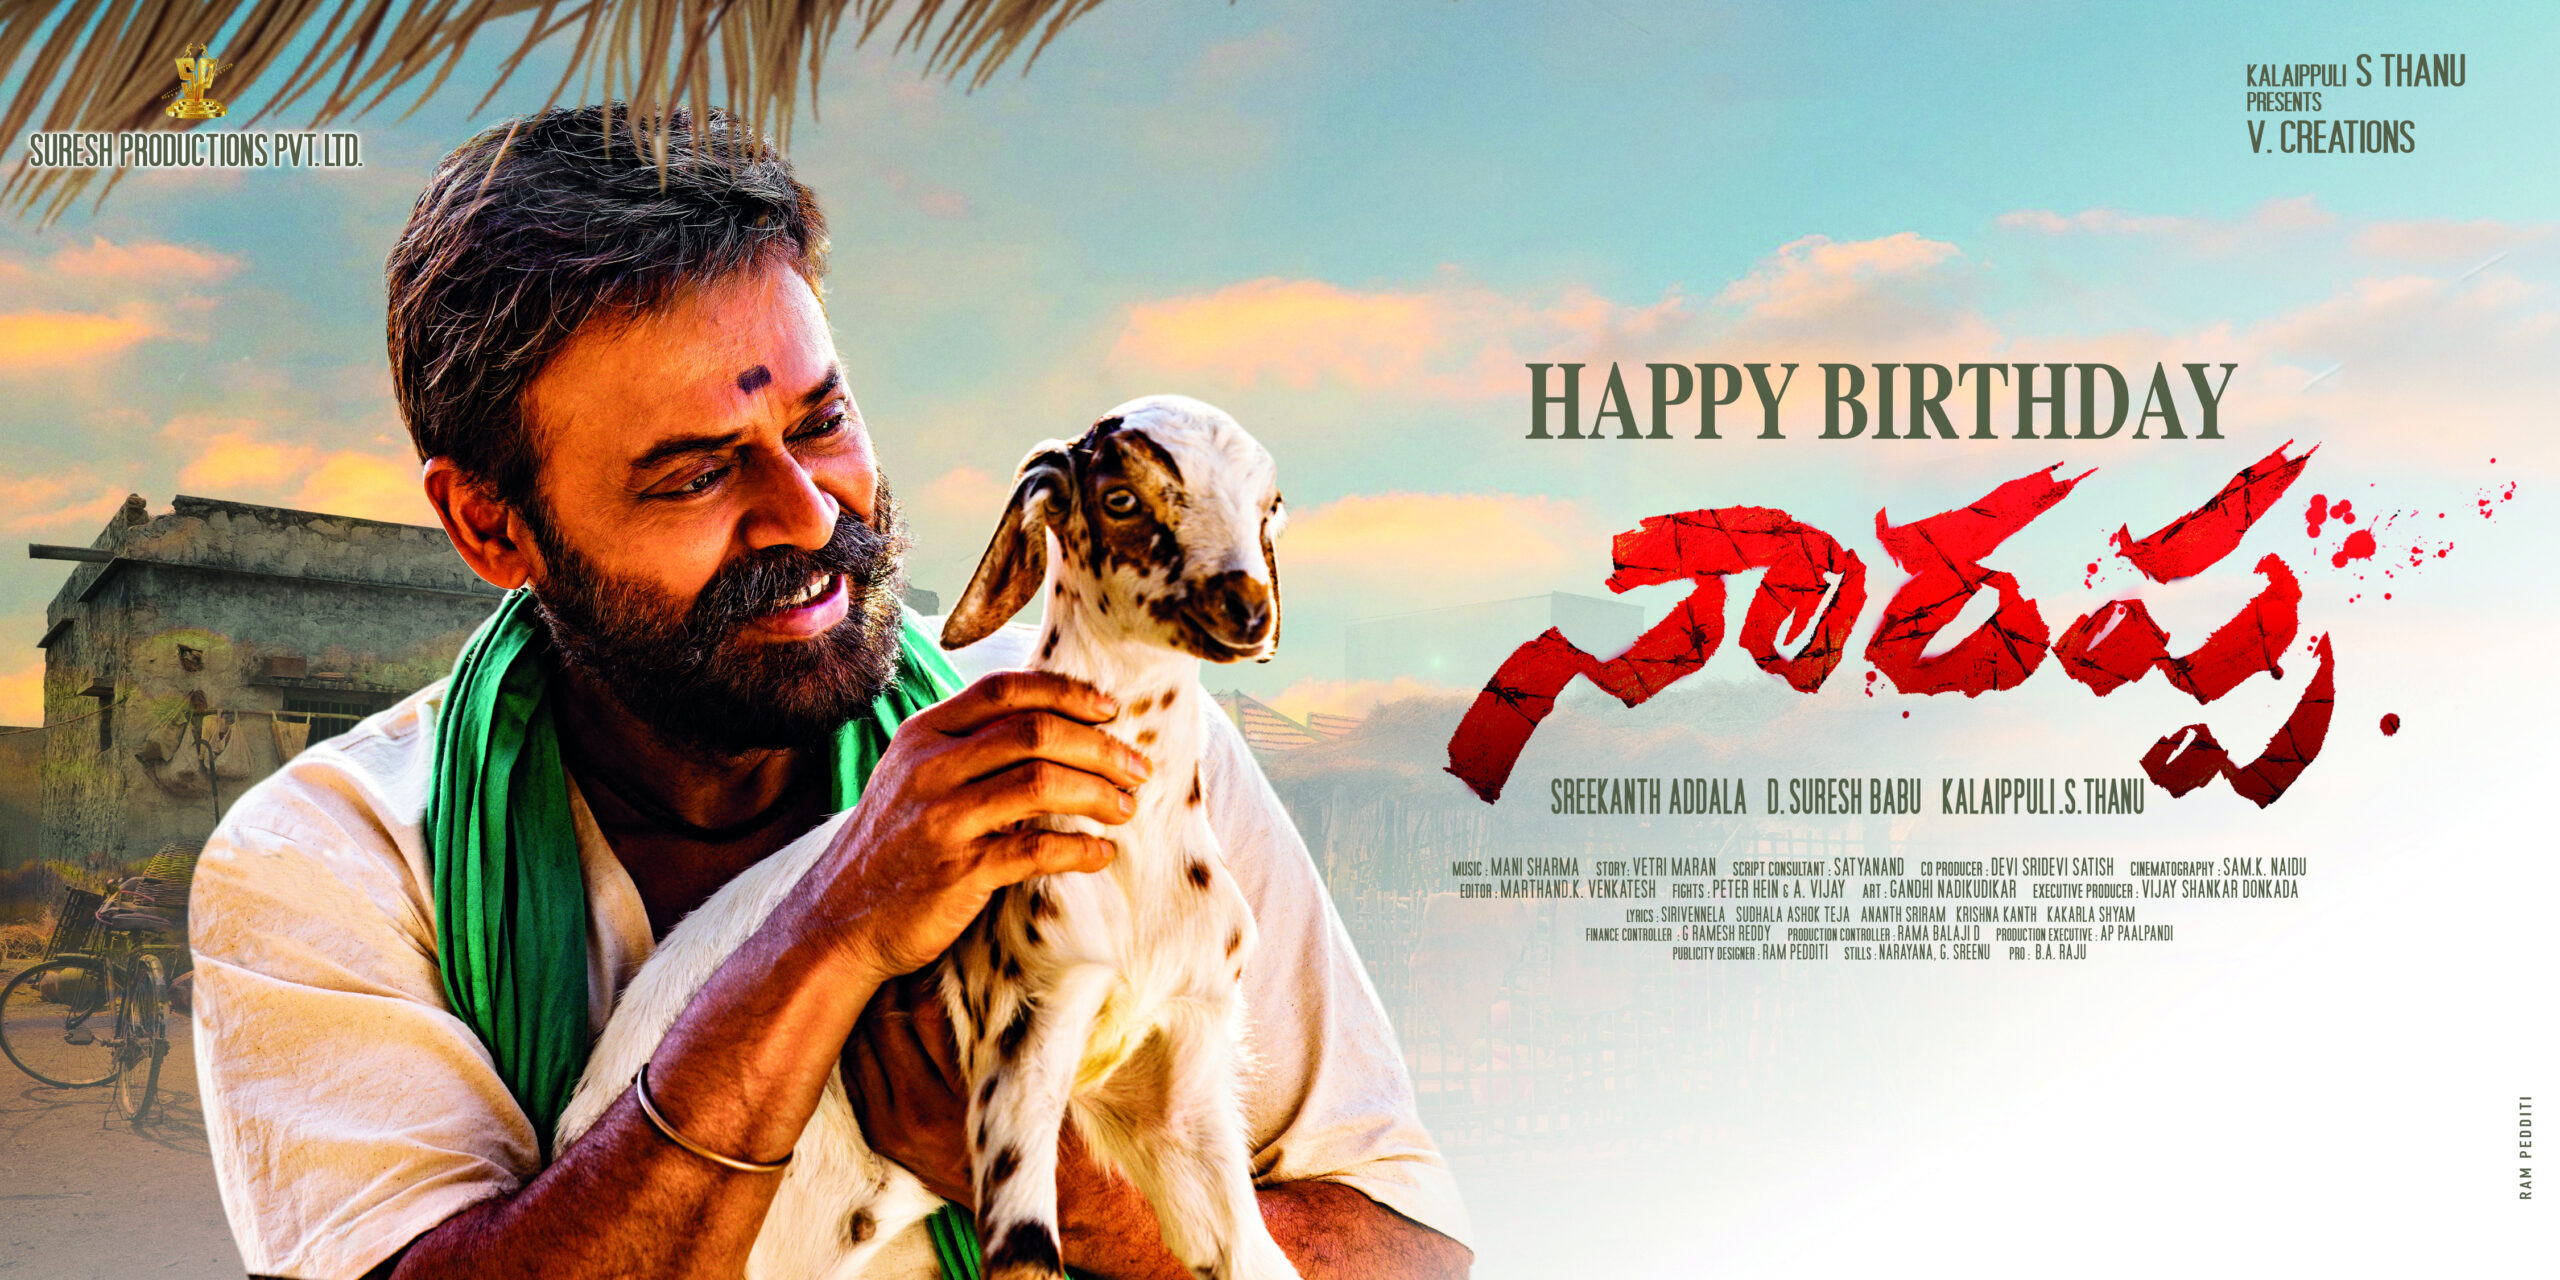 I Am Proud To Share The First Glimpse Of Narappa With You All – Victory Venkatesh